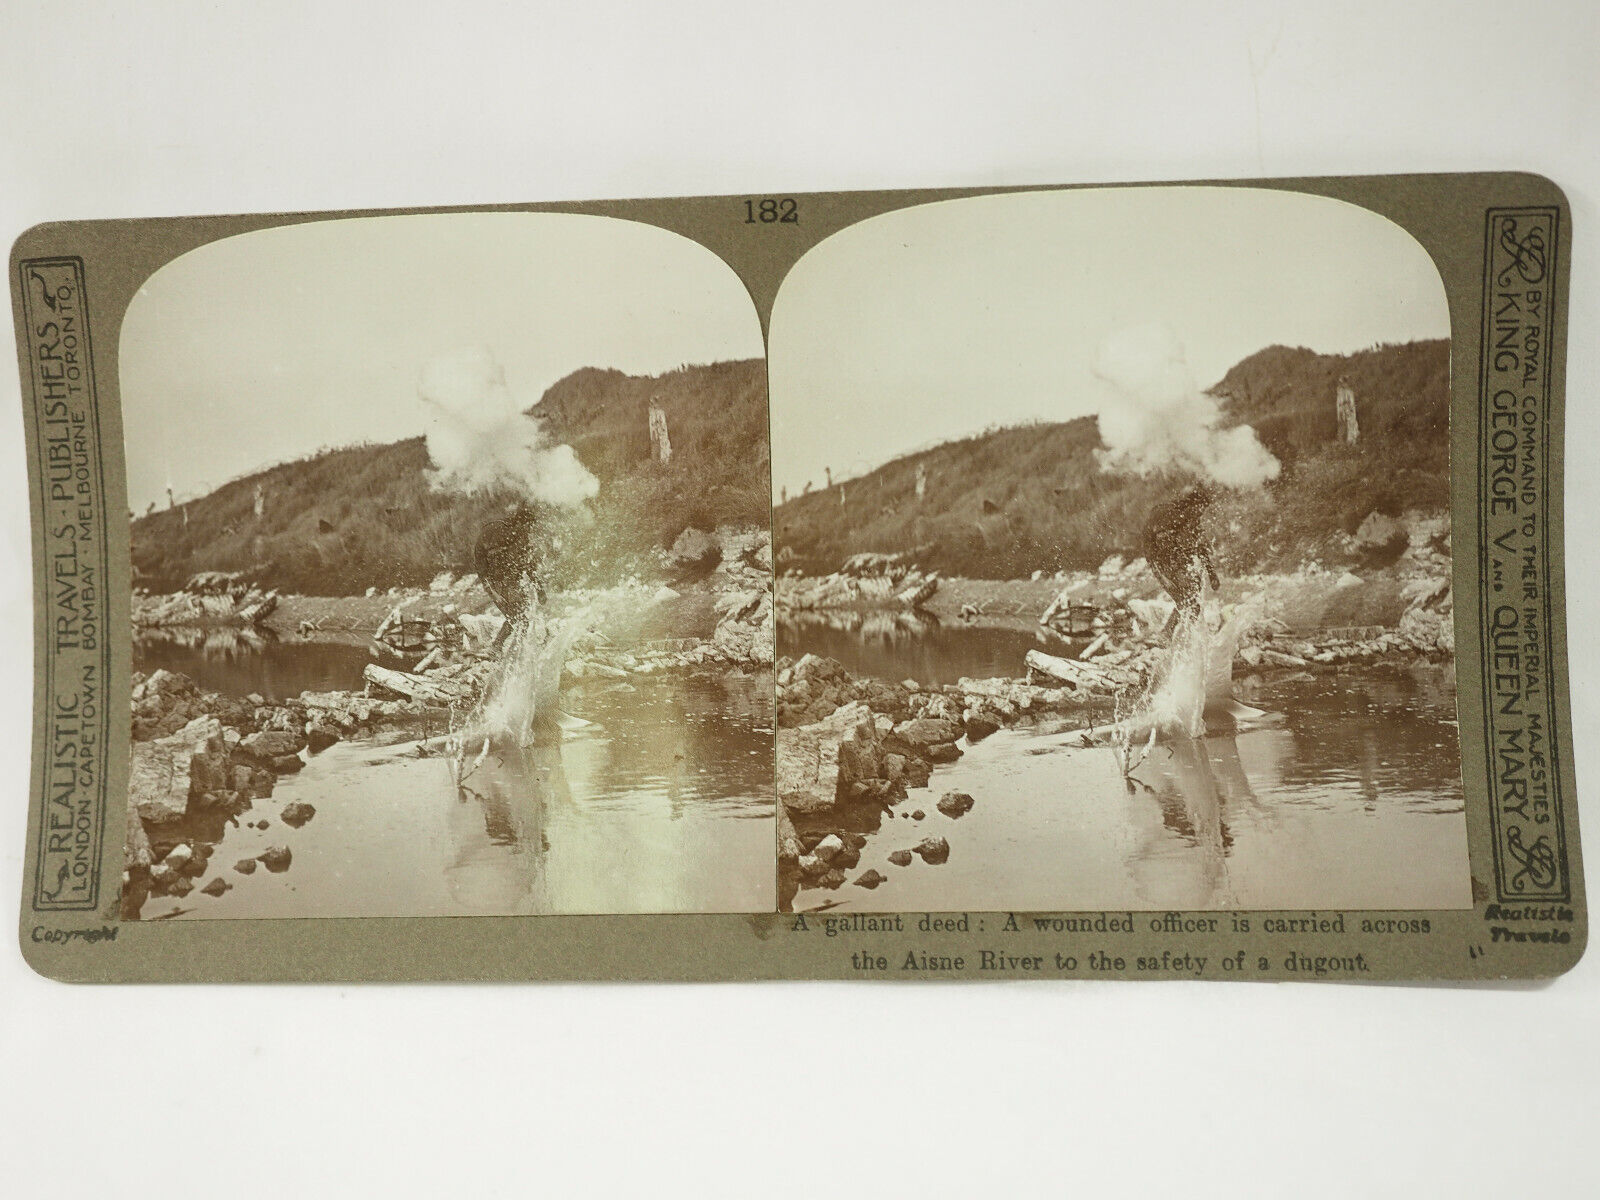 WWI Stereoview Card. Realistic Travels Publishers. 182 A gallant deed. 